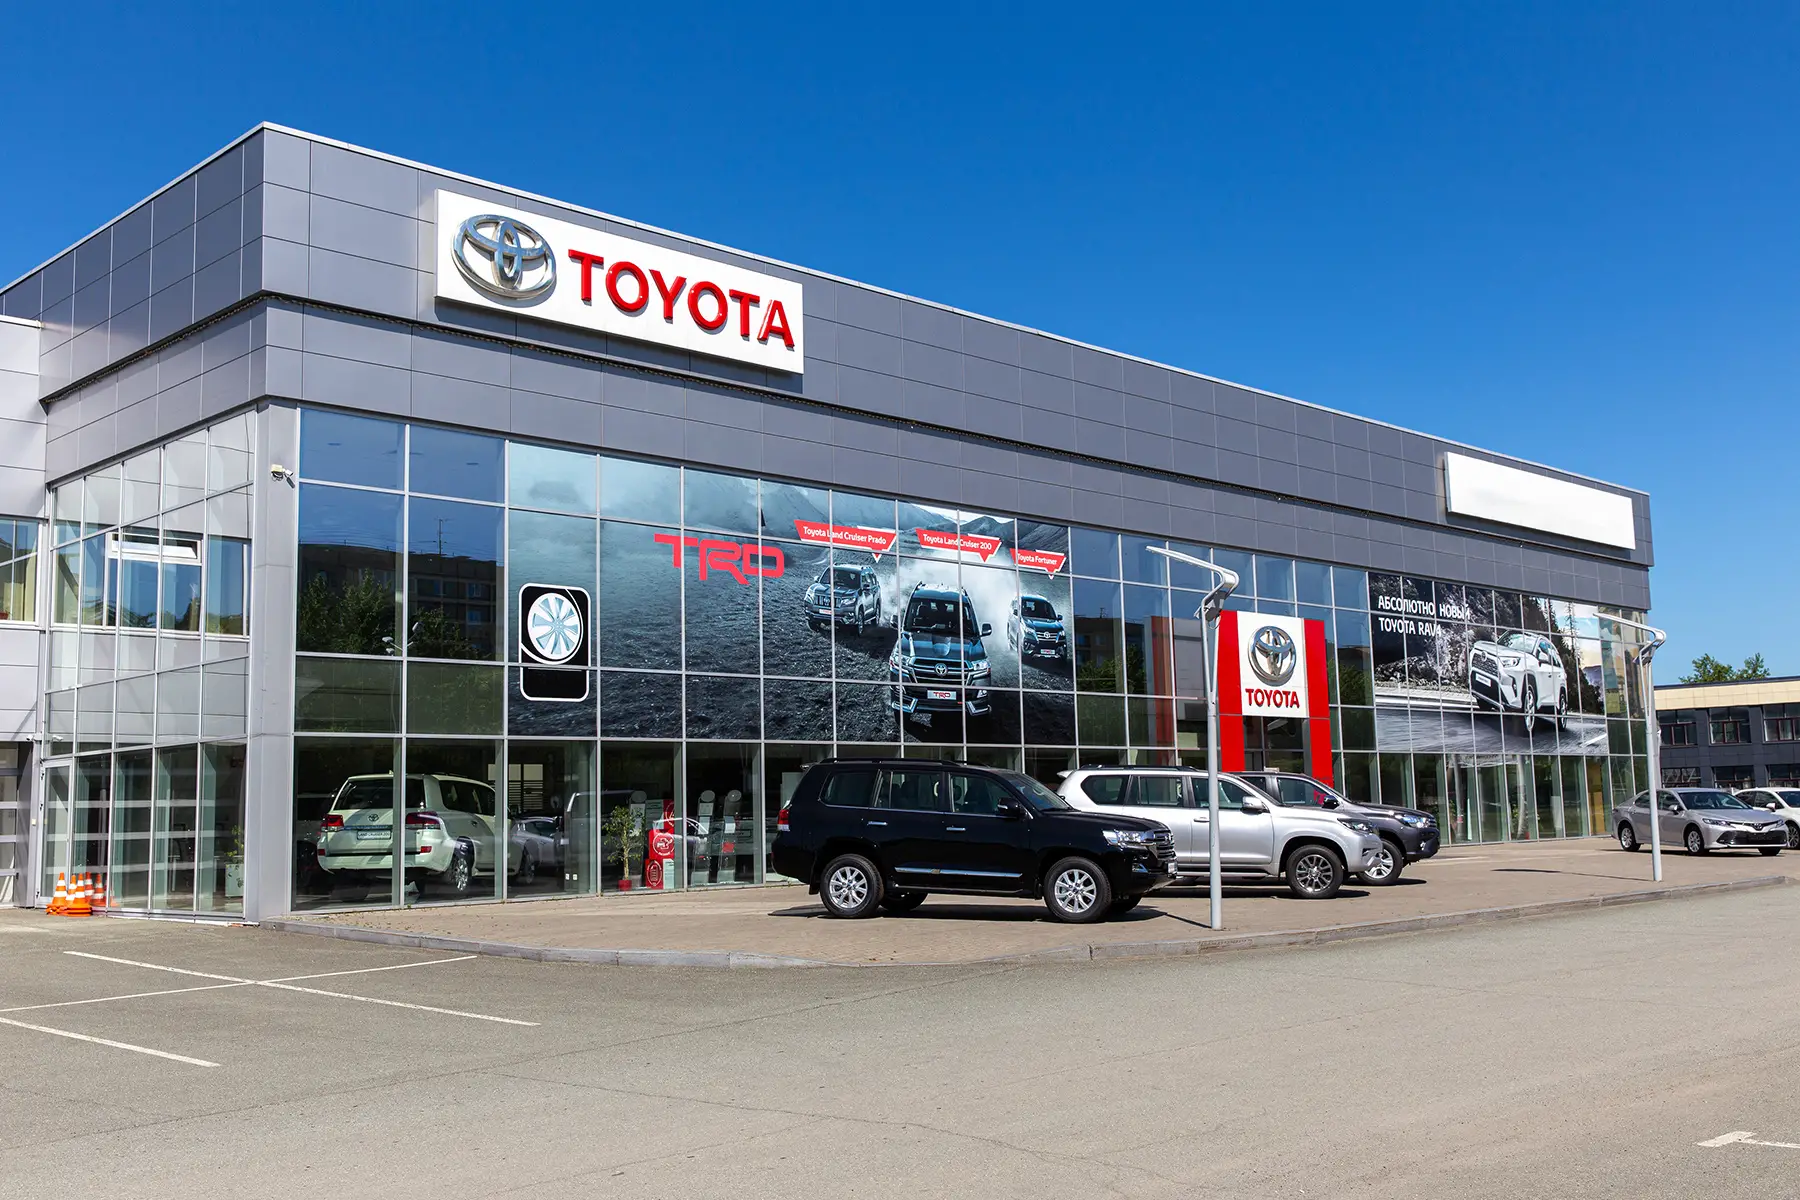 A Toyota dealership on a sunny day